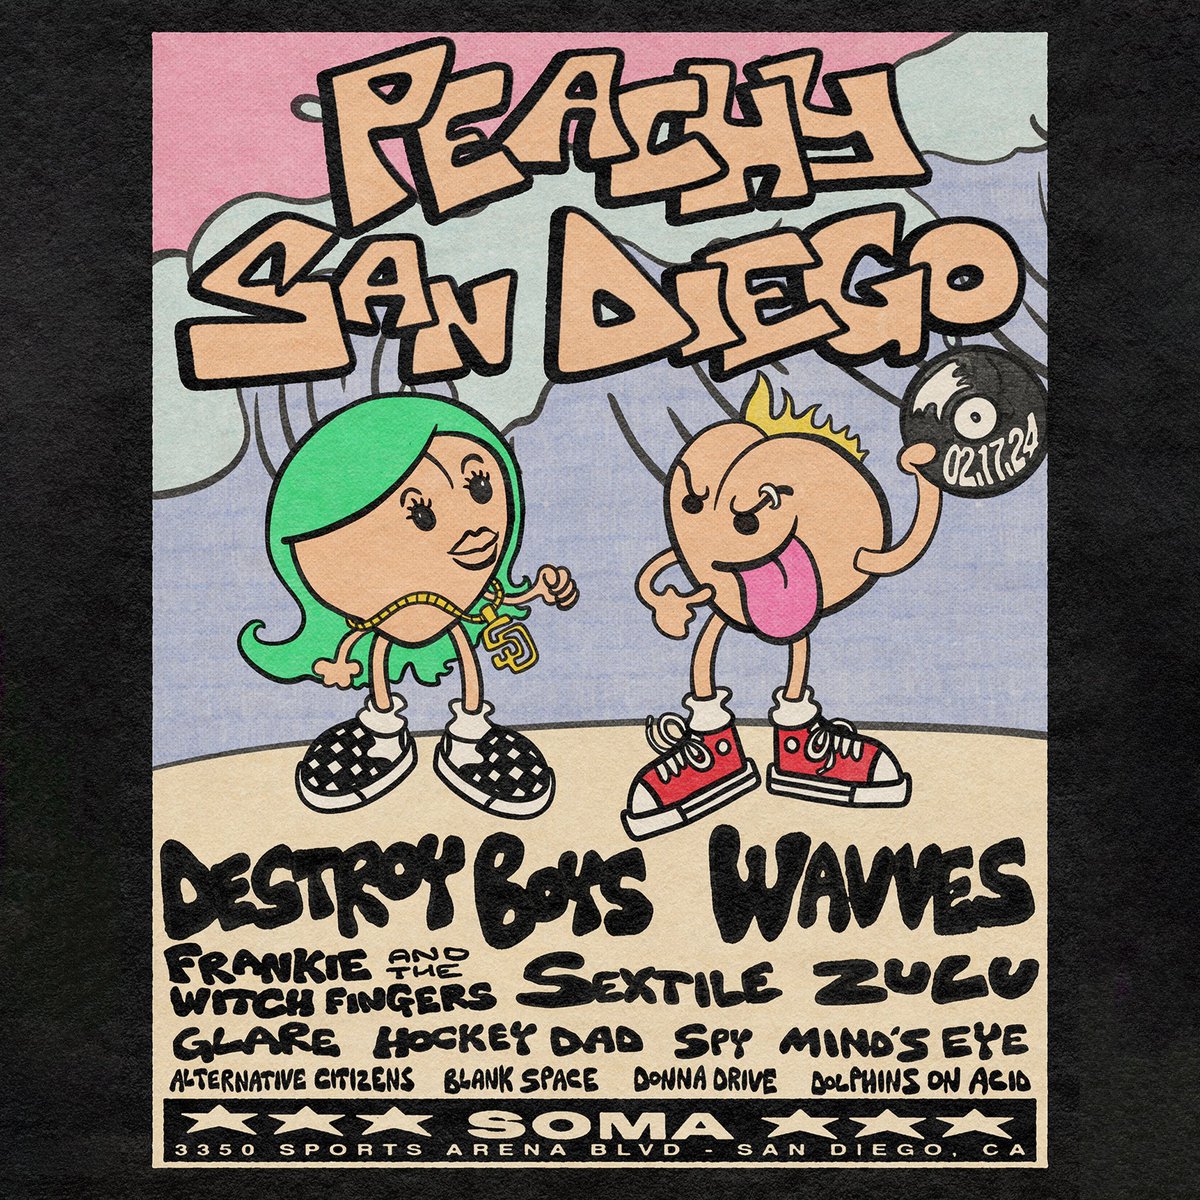 Frankie and @theWitchFingers have been added to our already stacked line up for Peachy San Diego Feb 17th @SOMAsd. Tickets available NOW. ticketweb.com/event/peachy-s…